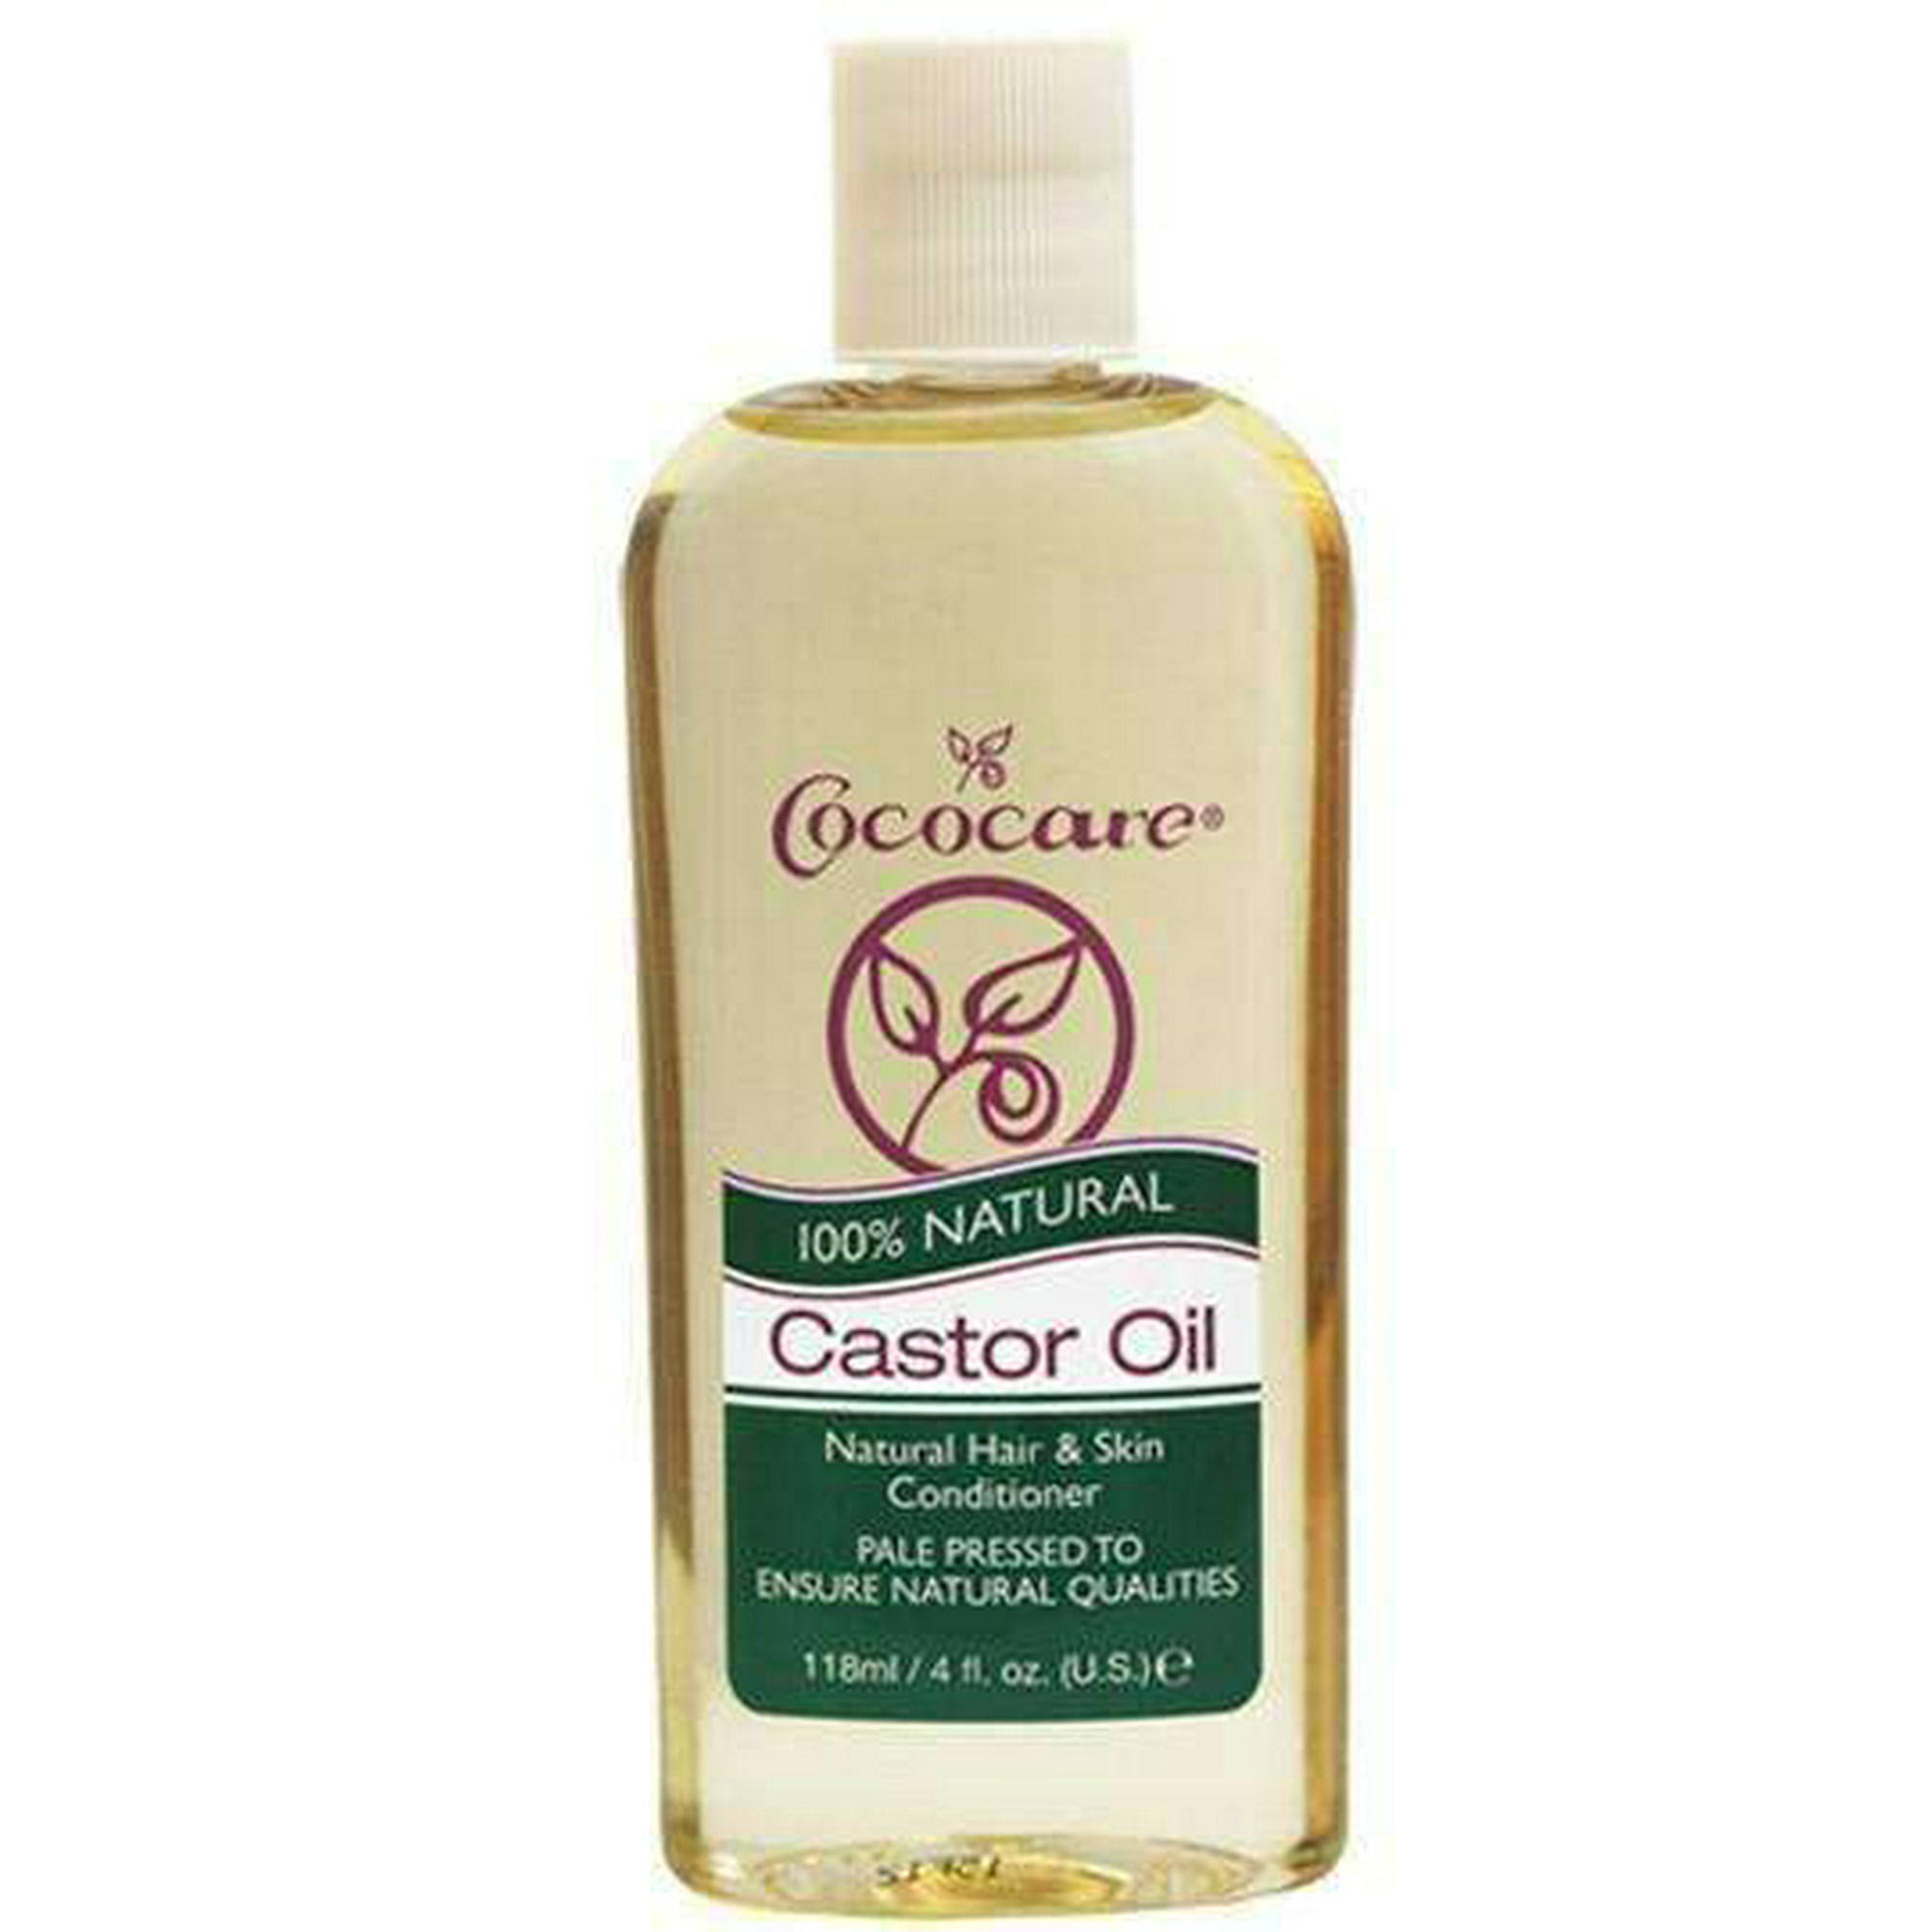 Cococare 100% Natural Castor Oil Natural Hair & Skin Conditioner - 120ml